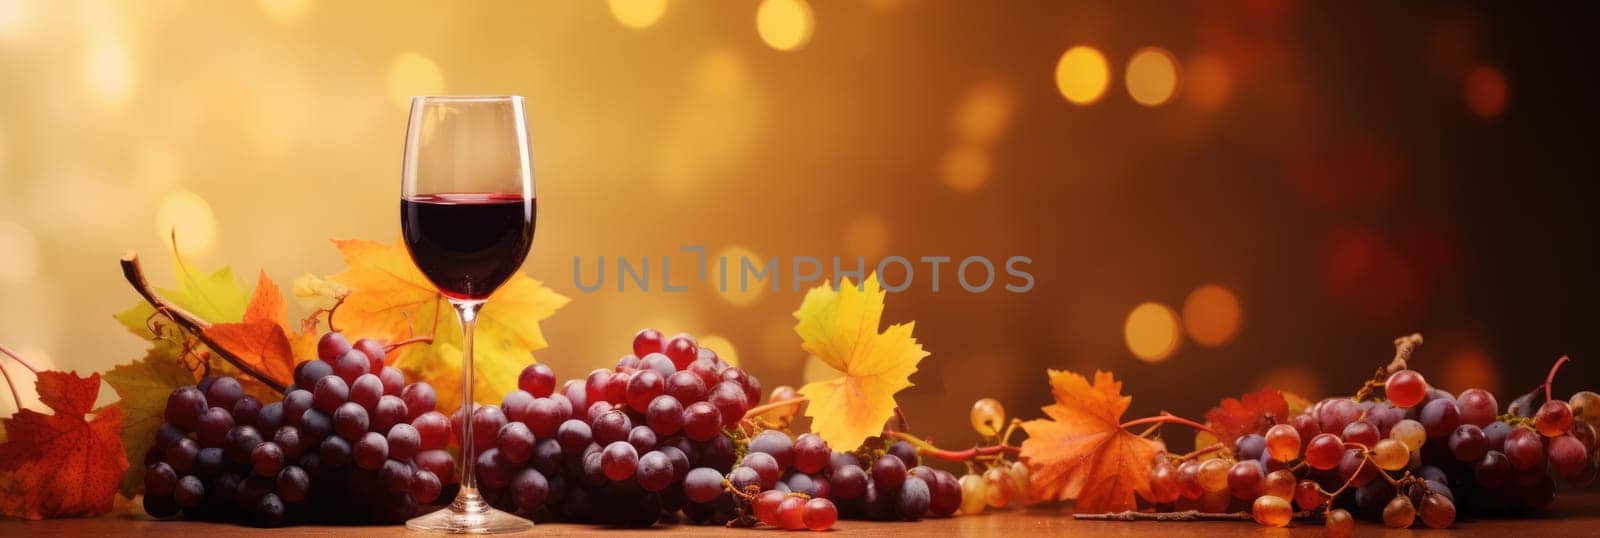 Wine and grapes background. Wide format banner by natali_brill